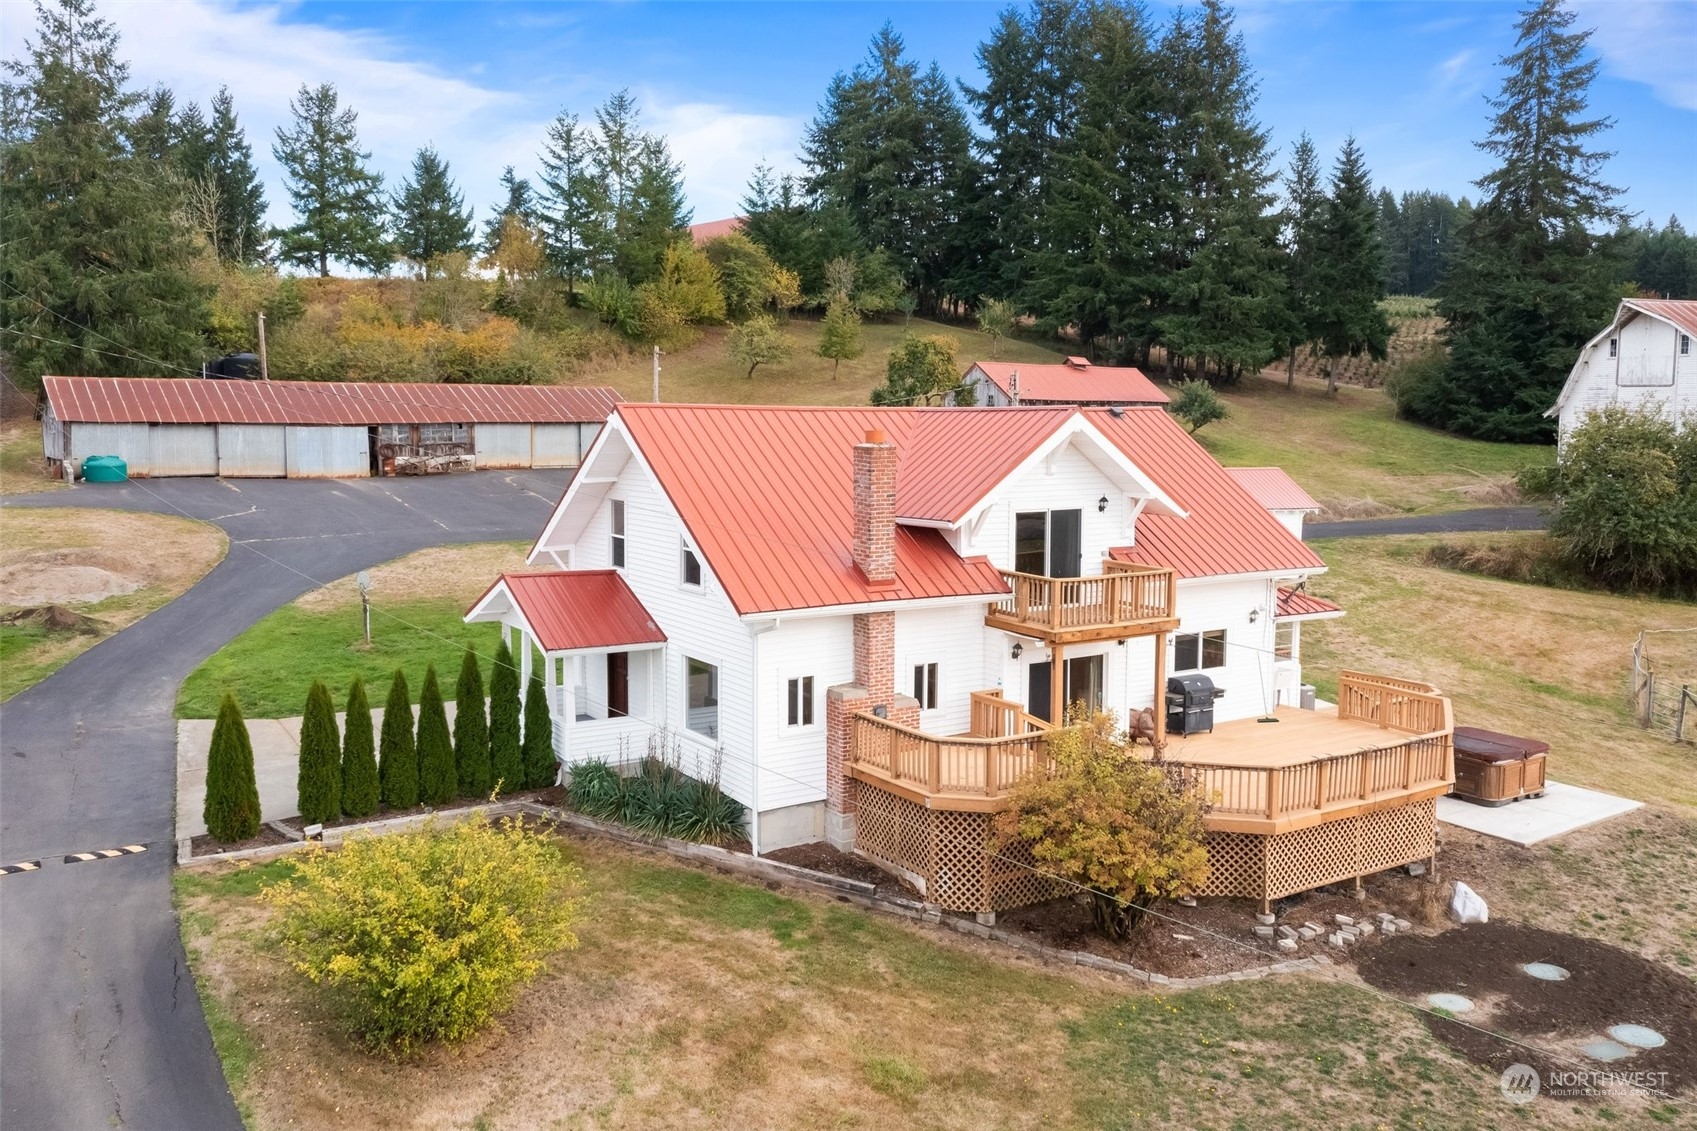 Details for 1827 Lincoln Creek Road, Rochester, WA 98579